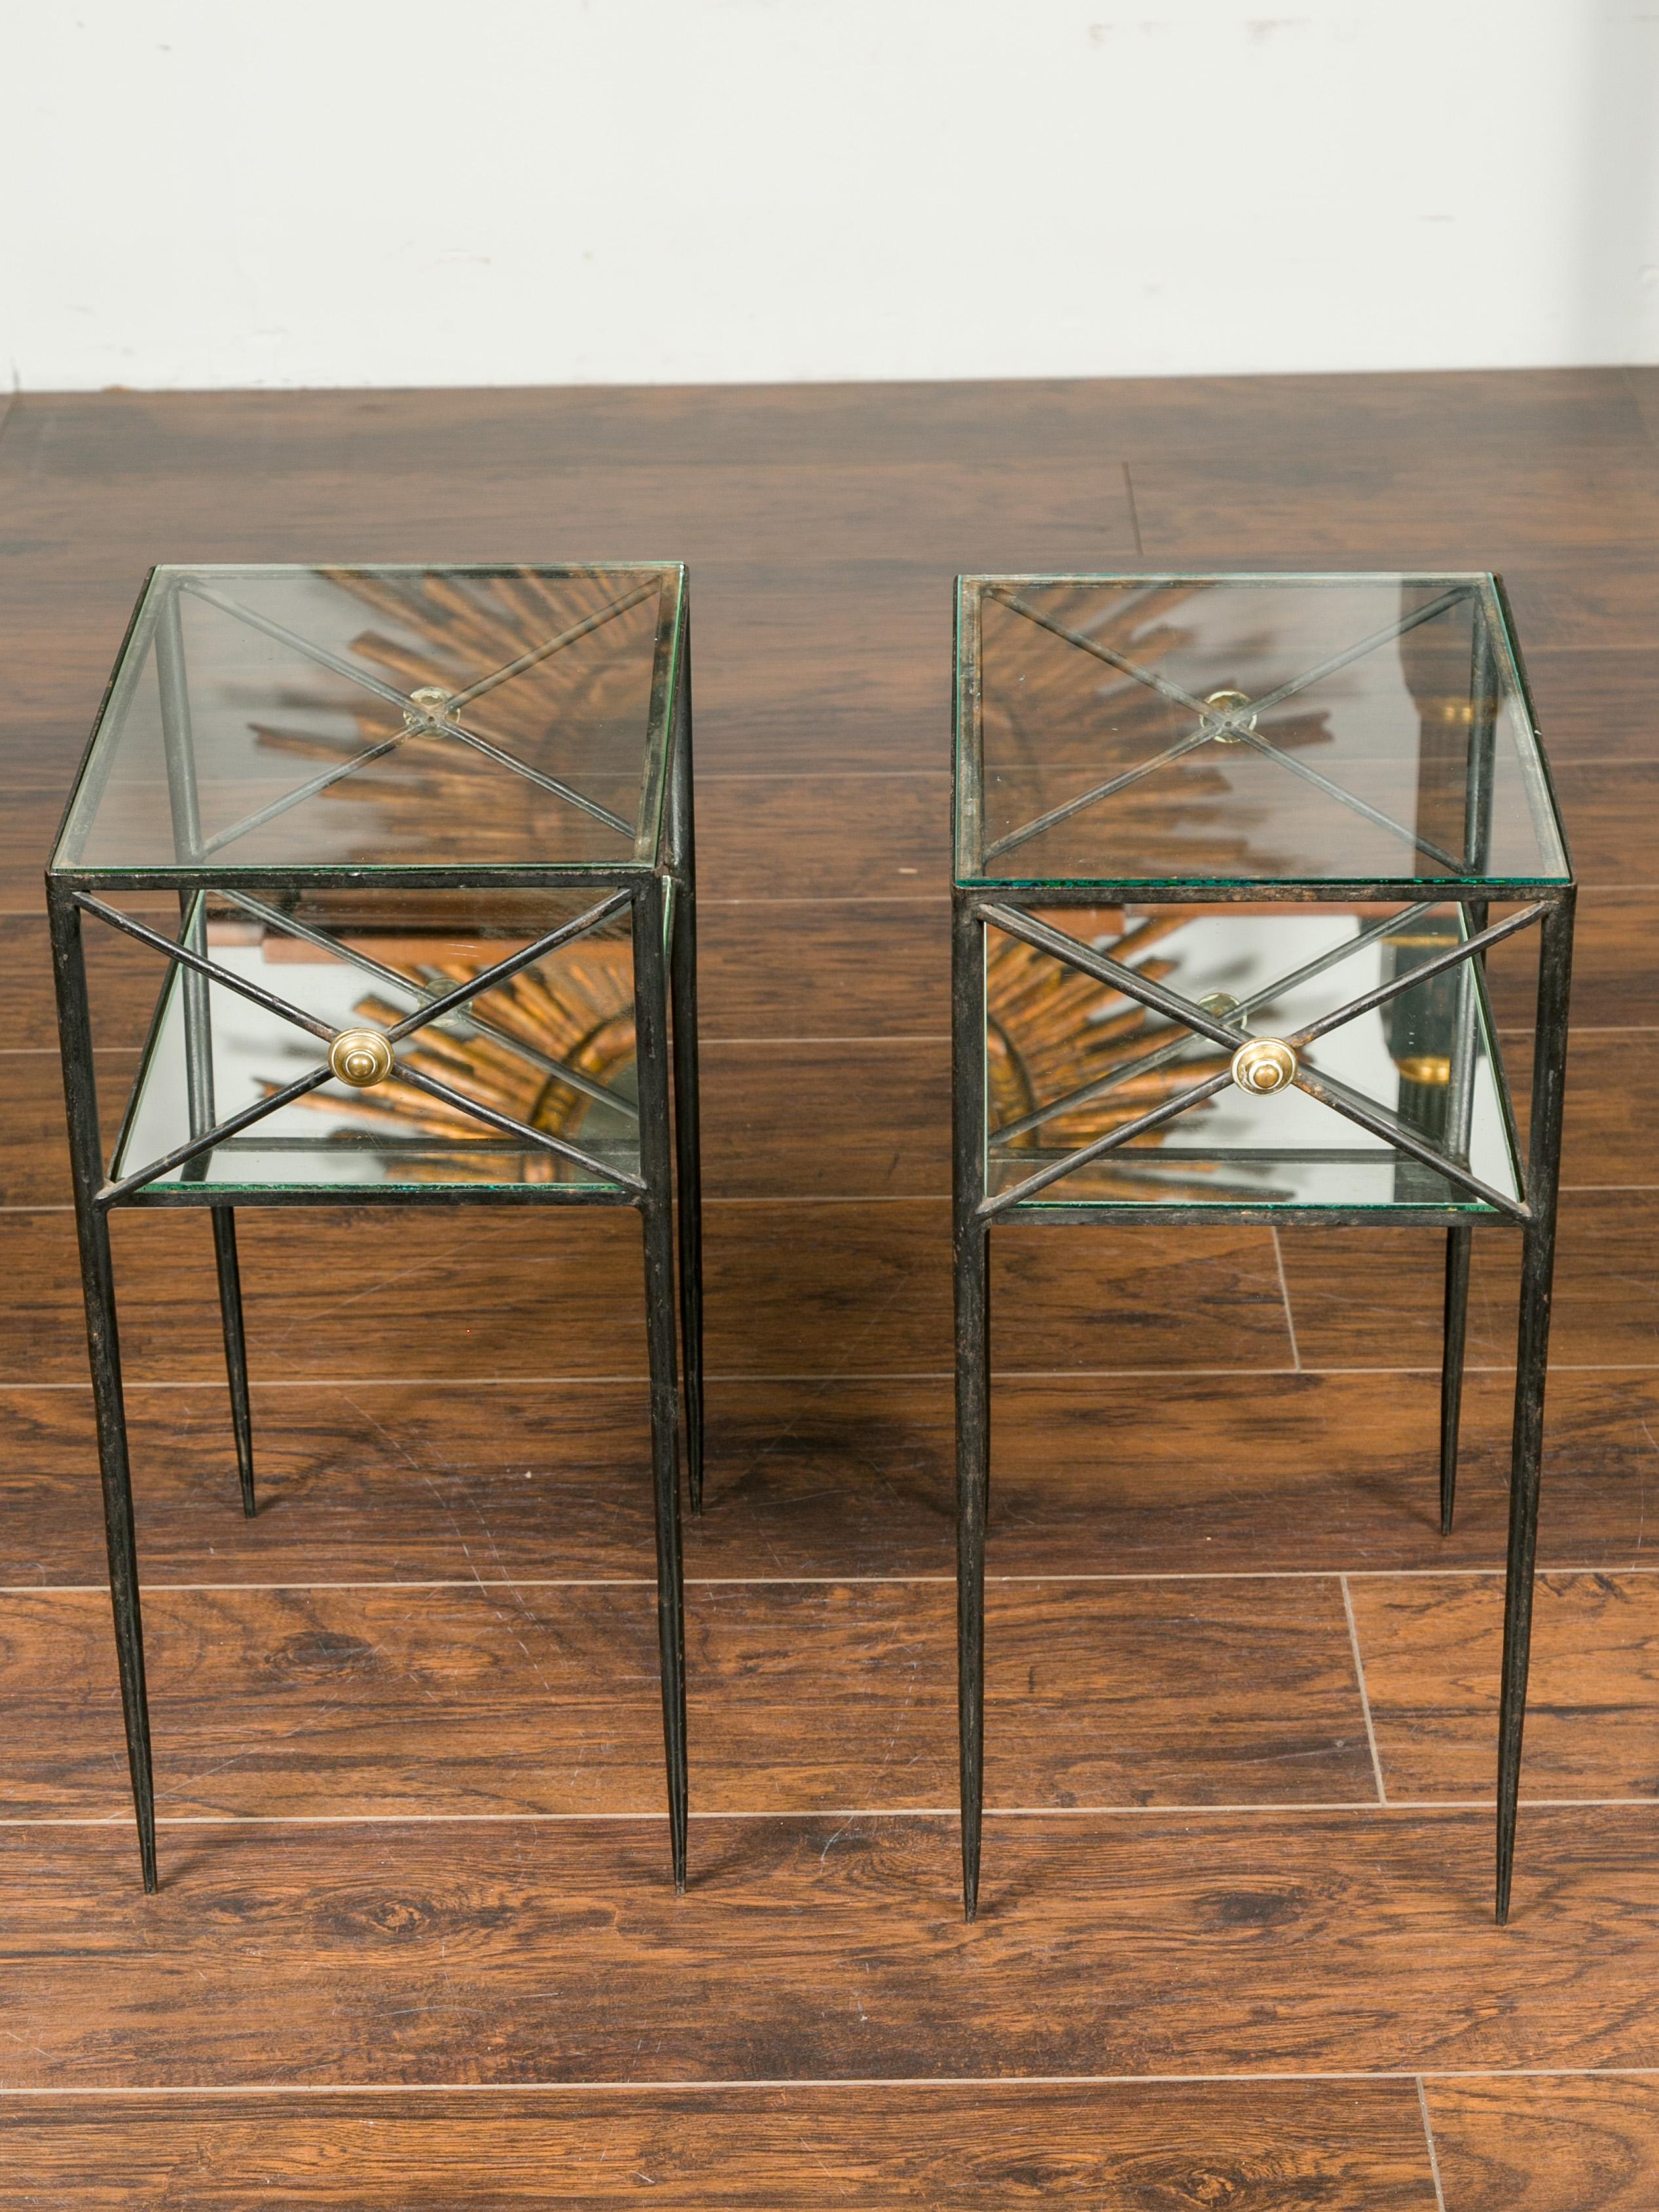 Pair of French Midcentury Iron and Brass Tables with Glass Top, Mirrored Shelf 4